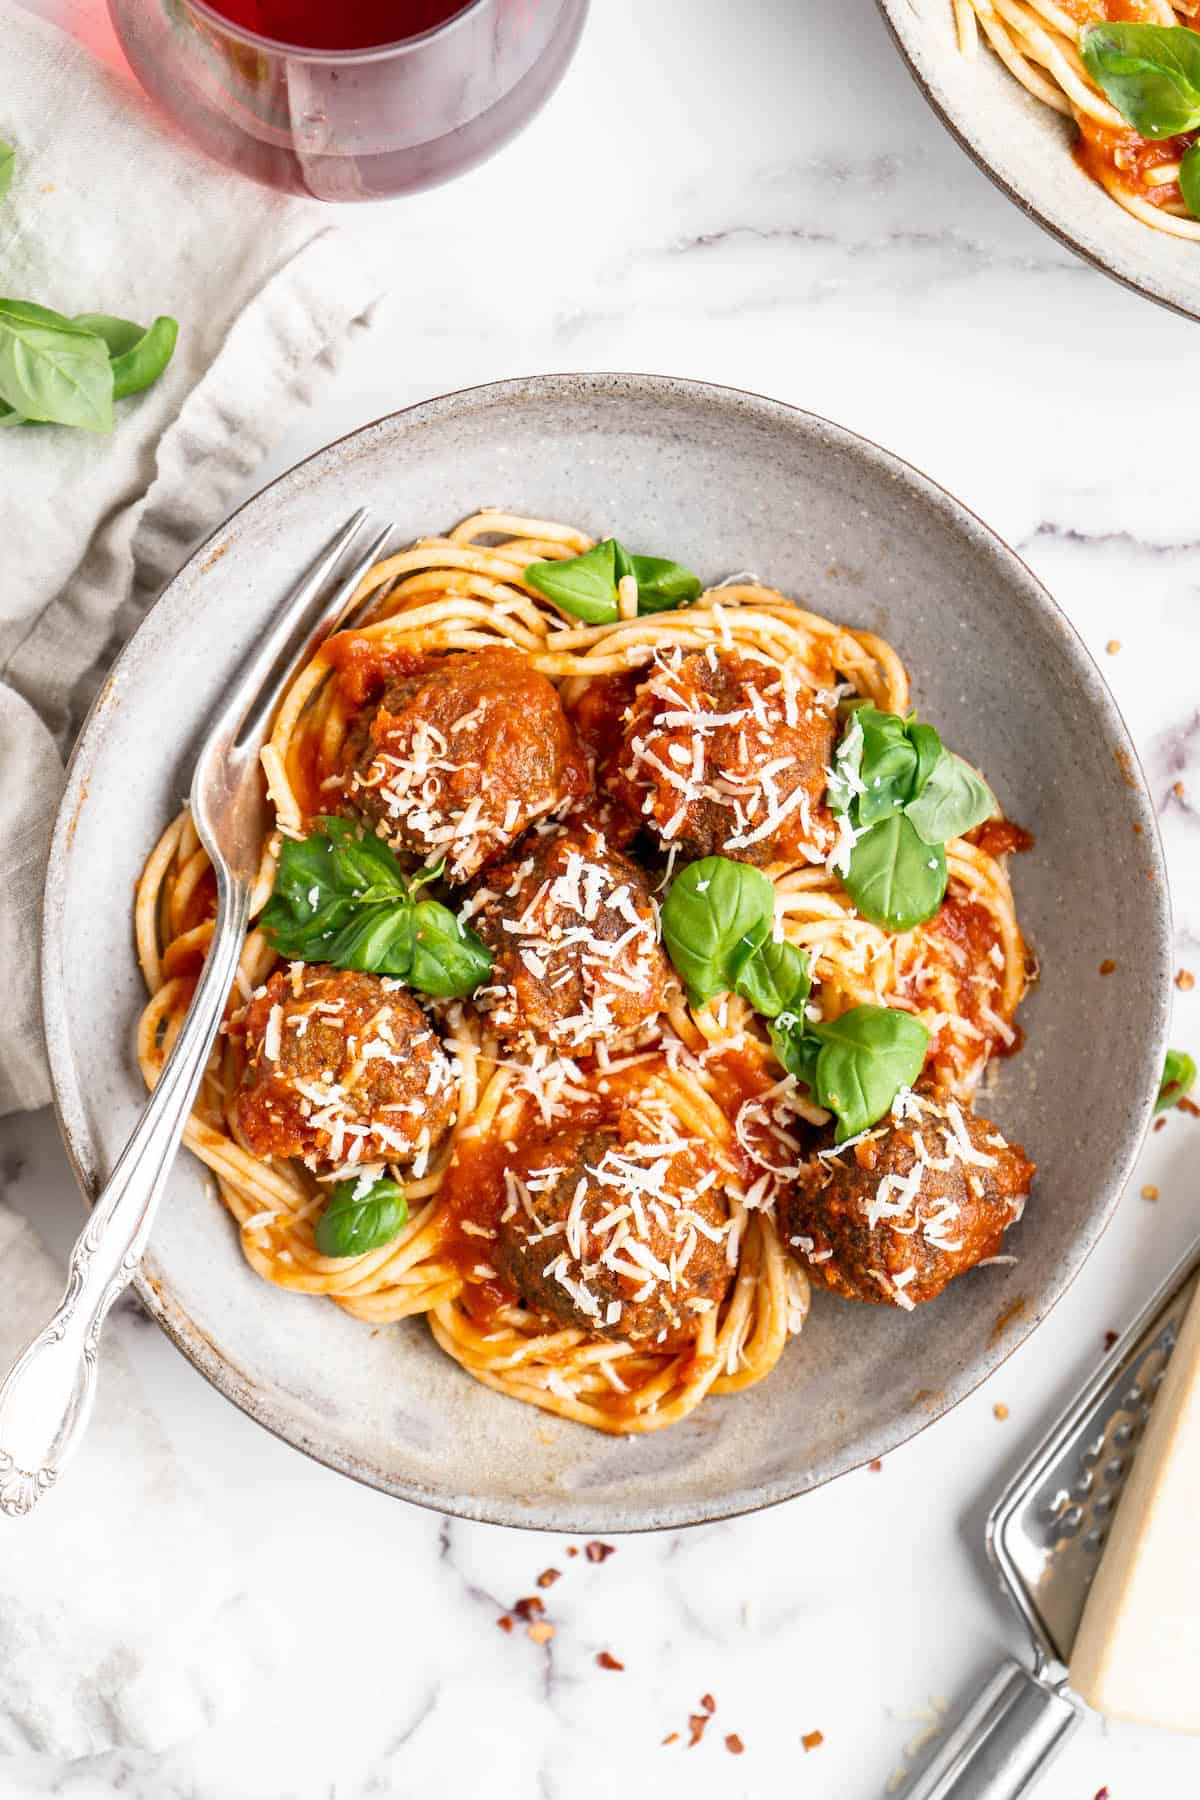 Overhead view of vegan spaghetti and meatballs on plate with fork